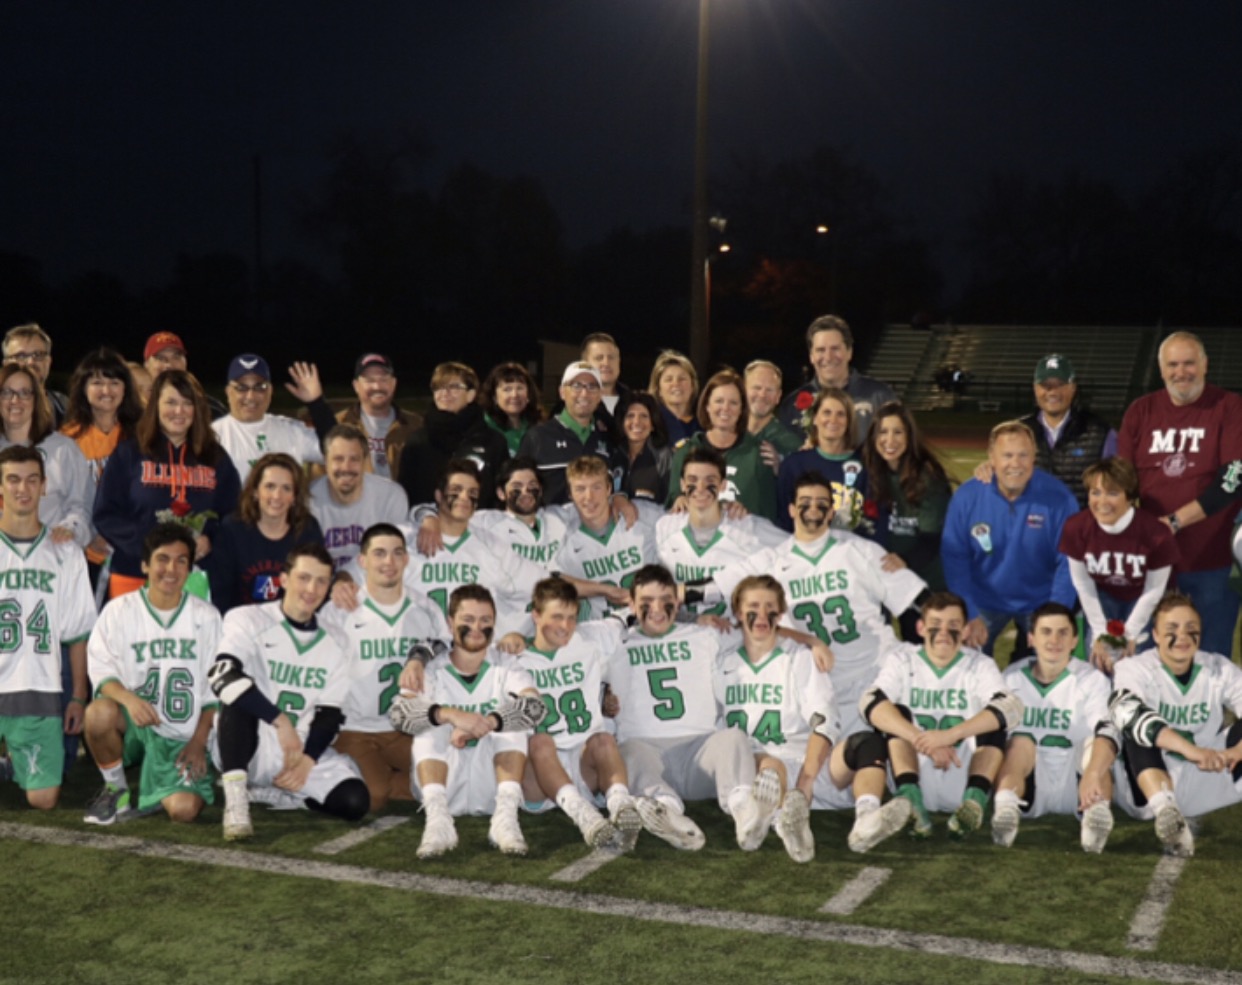 Senior lacrosse players and all of their parents stop for a picture at senior night on Tues., May 9 at the York Stadium. Some parents even sported shirts of where their sons will be attending college next fall.